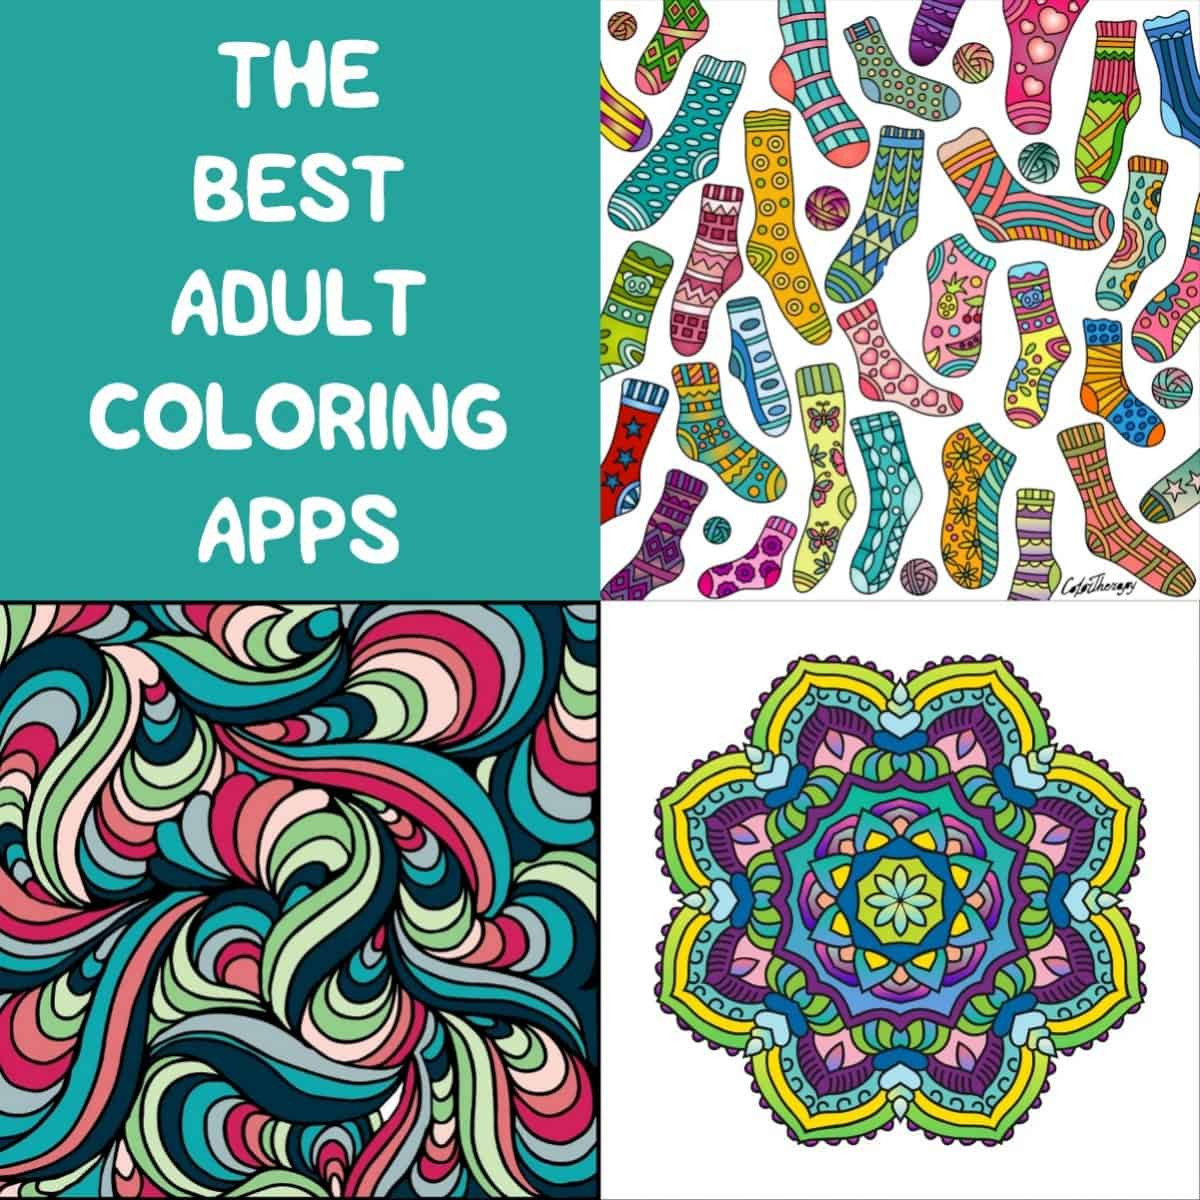 Coloring Book Apps For Adults
 The Best Adult Coloring Apps diycandy